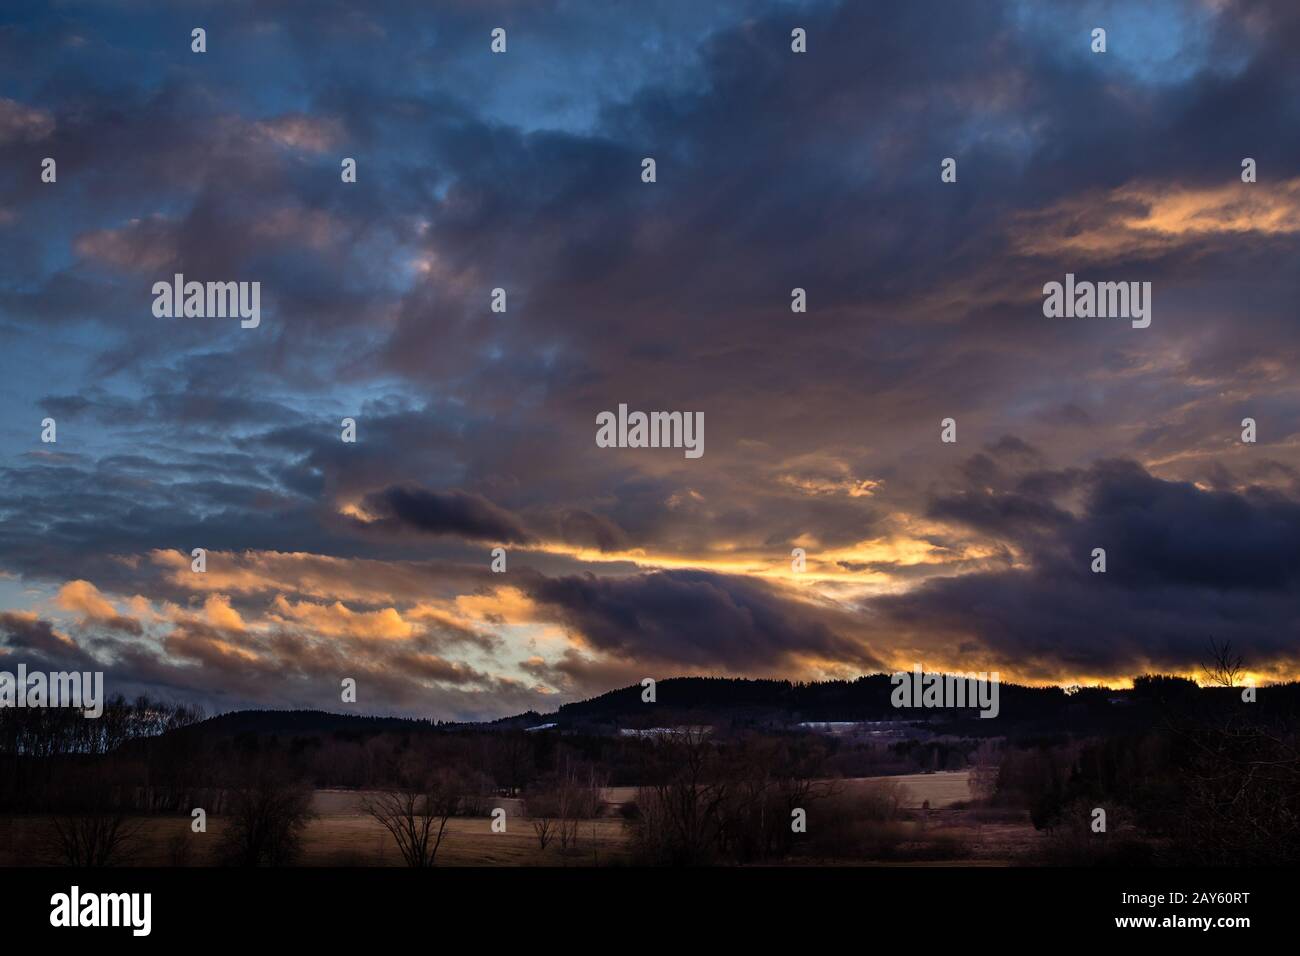 Beautiful sunset - red sky over hilly landscape, blue sky with orange-colored clouds Stock Photo